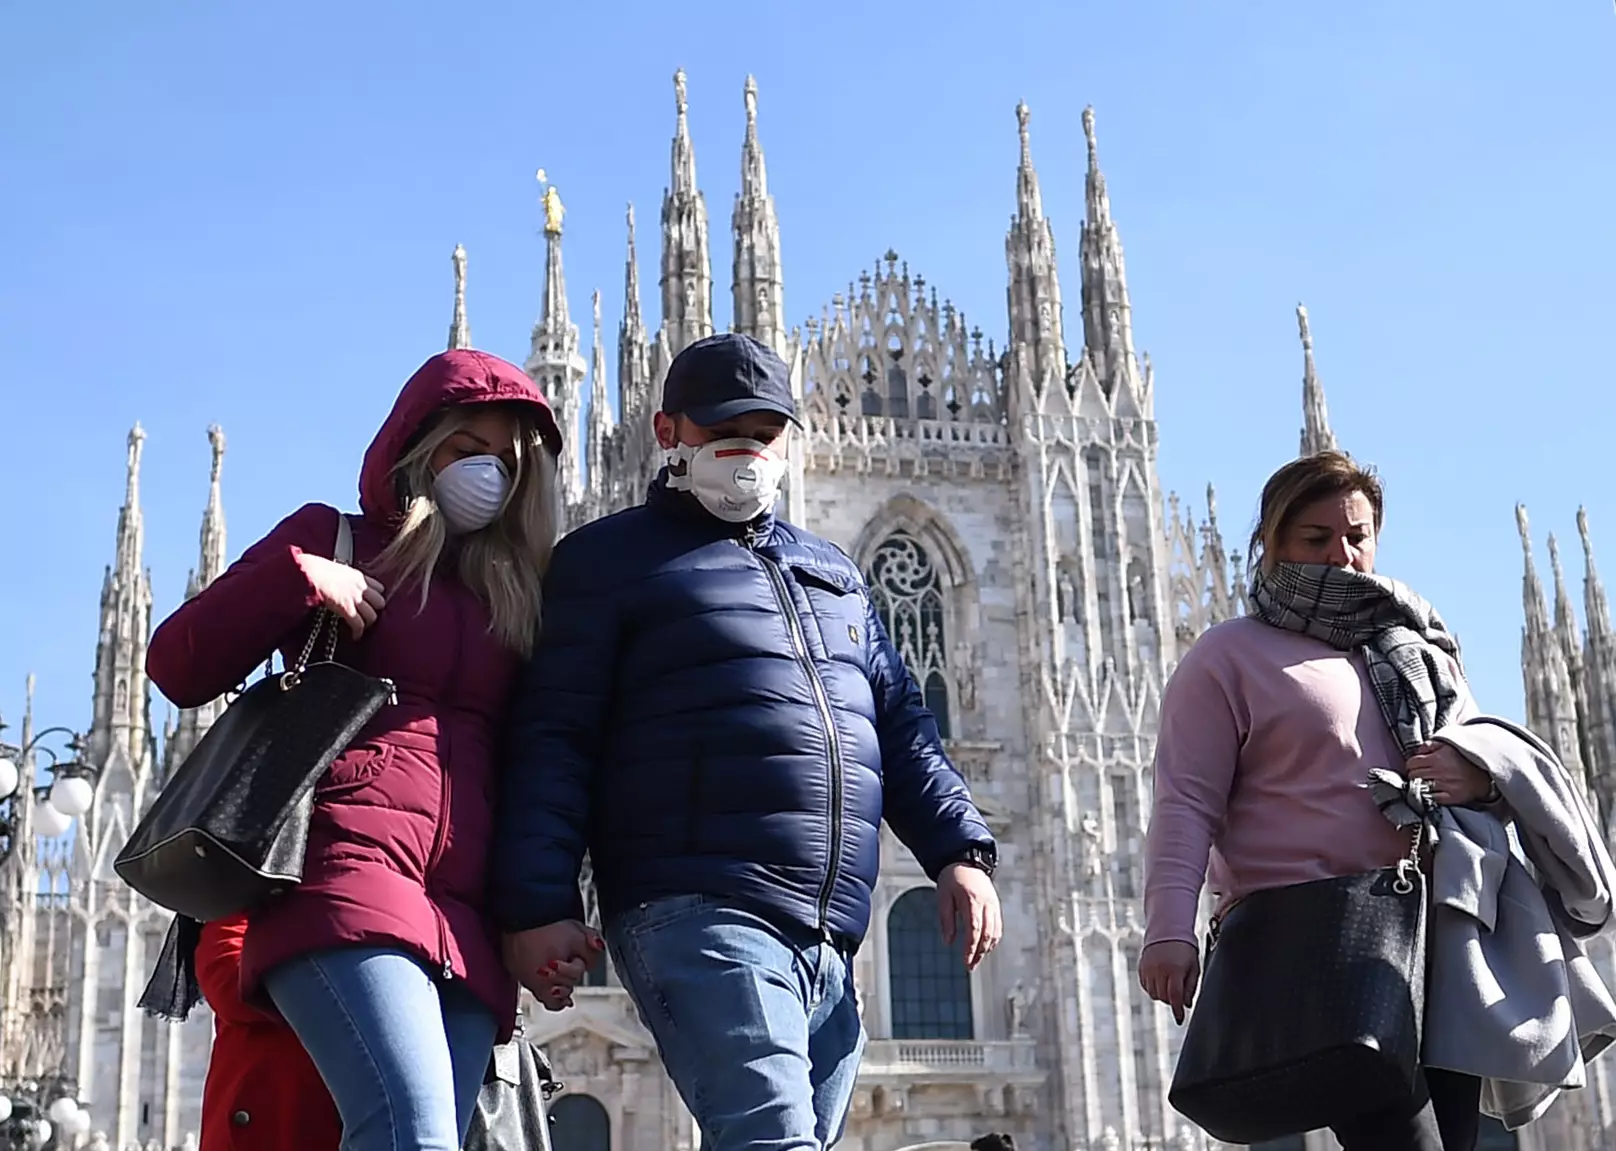 Italy has imposed strict travel restrictions in the Lombardy region.